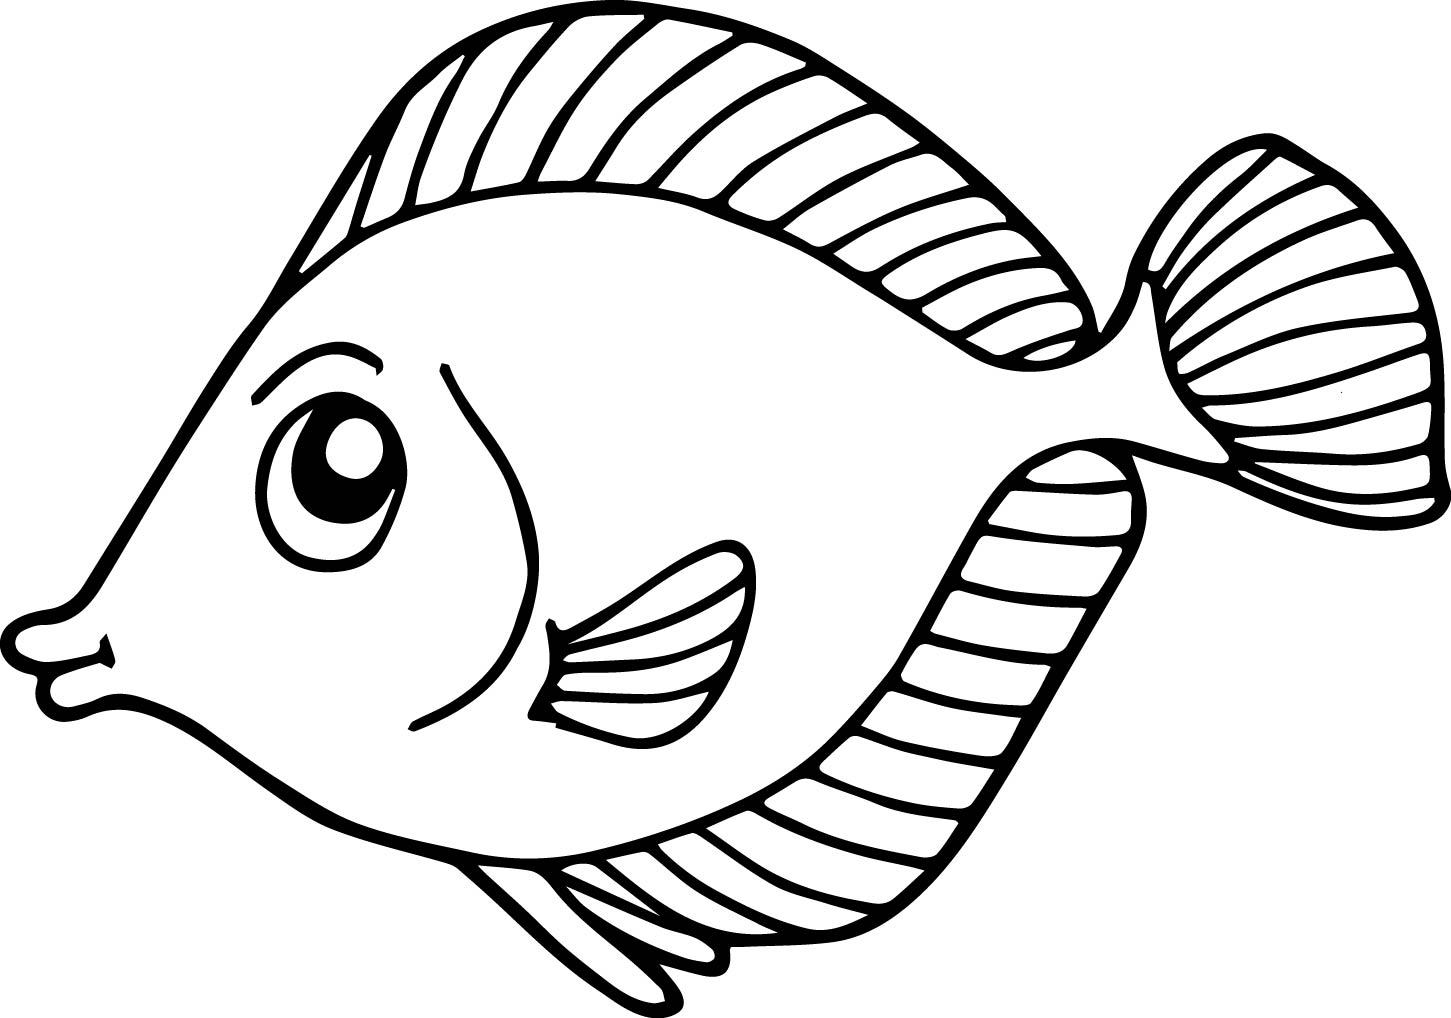 Fish Coloring Pages For Kids - Preschool and Kindergarten